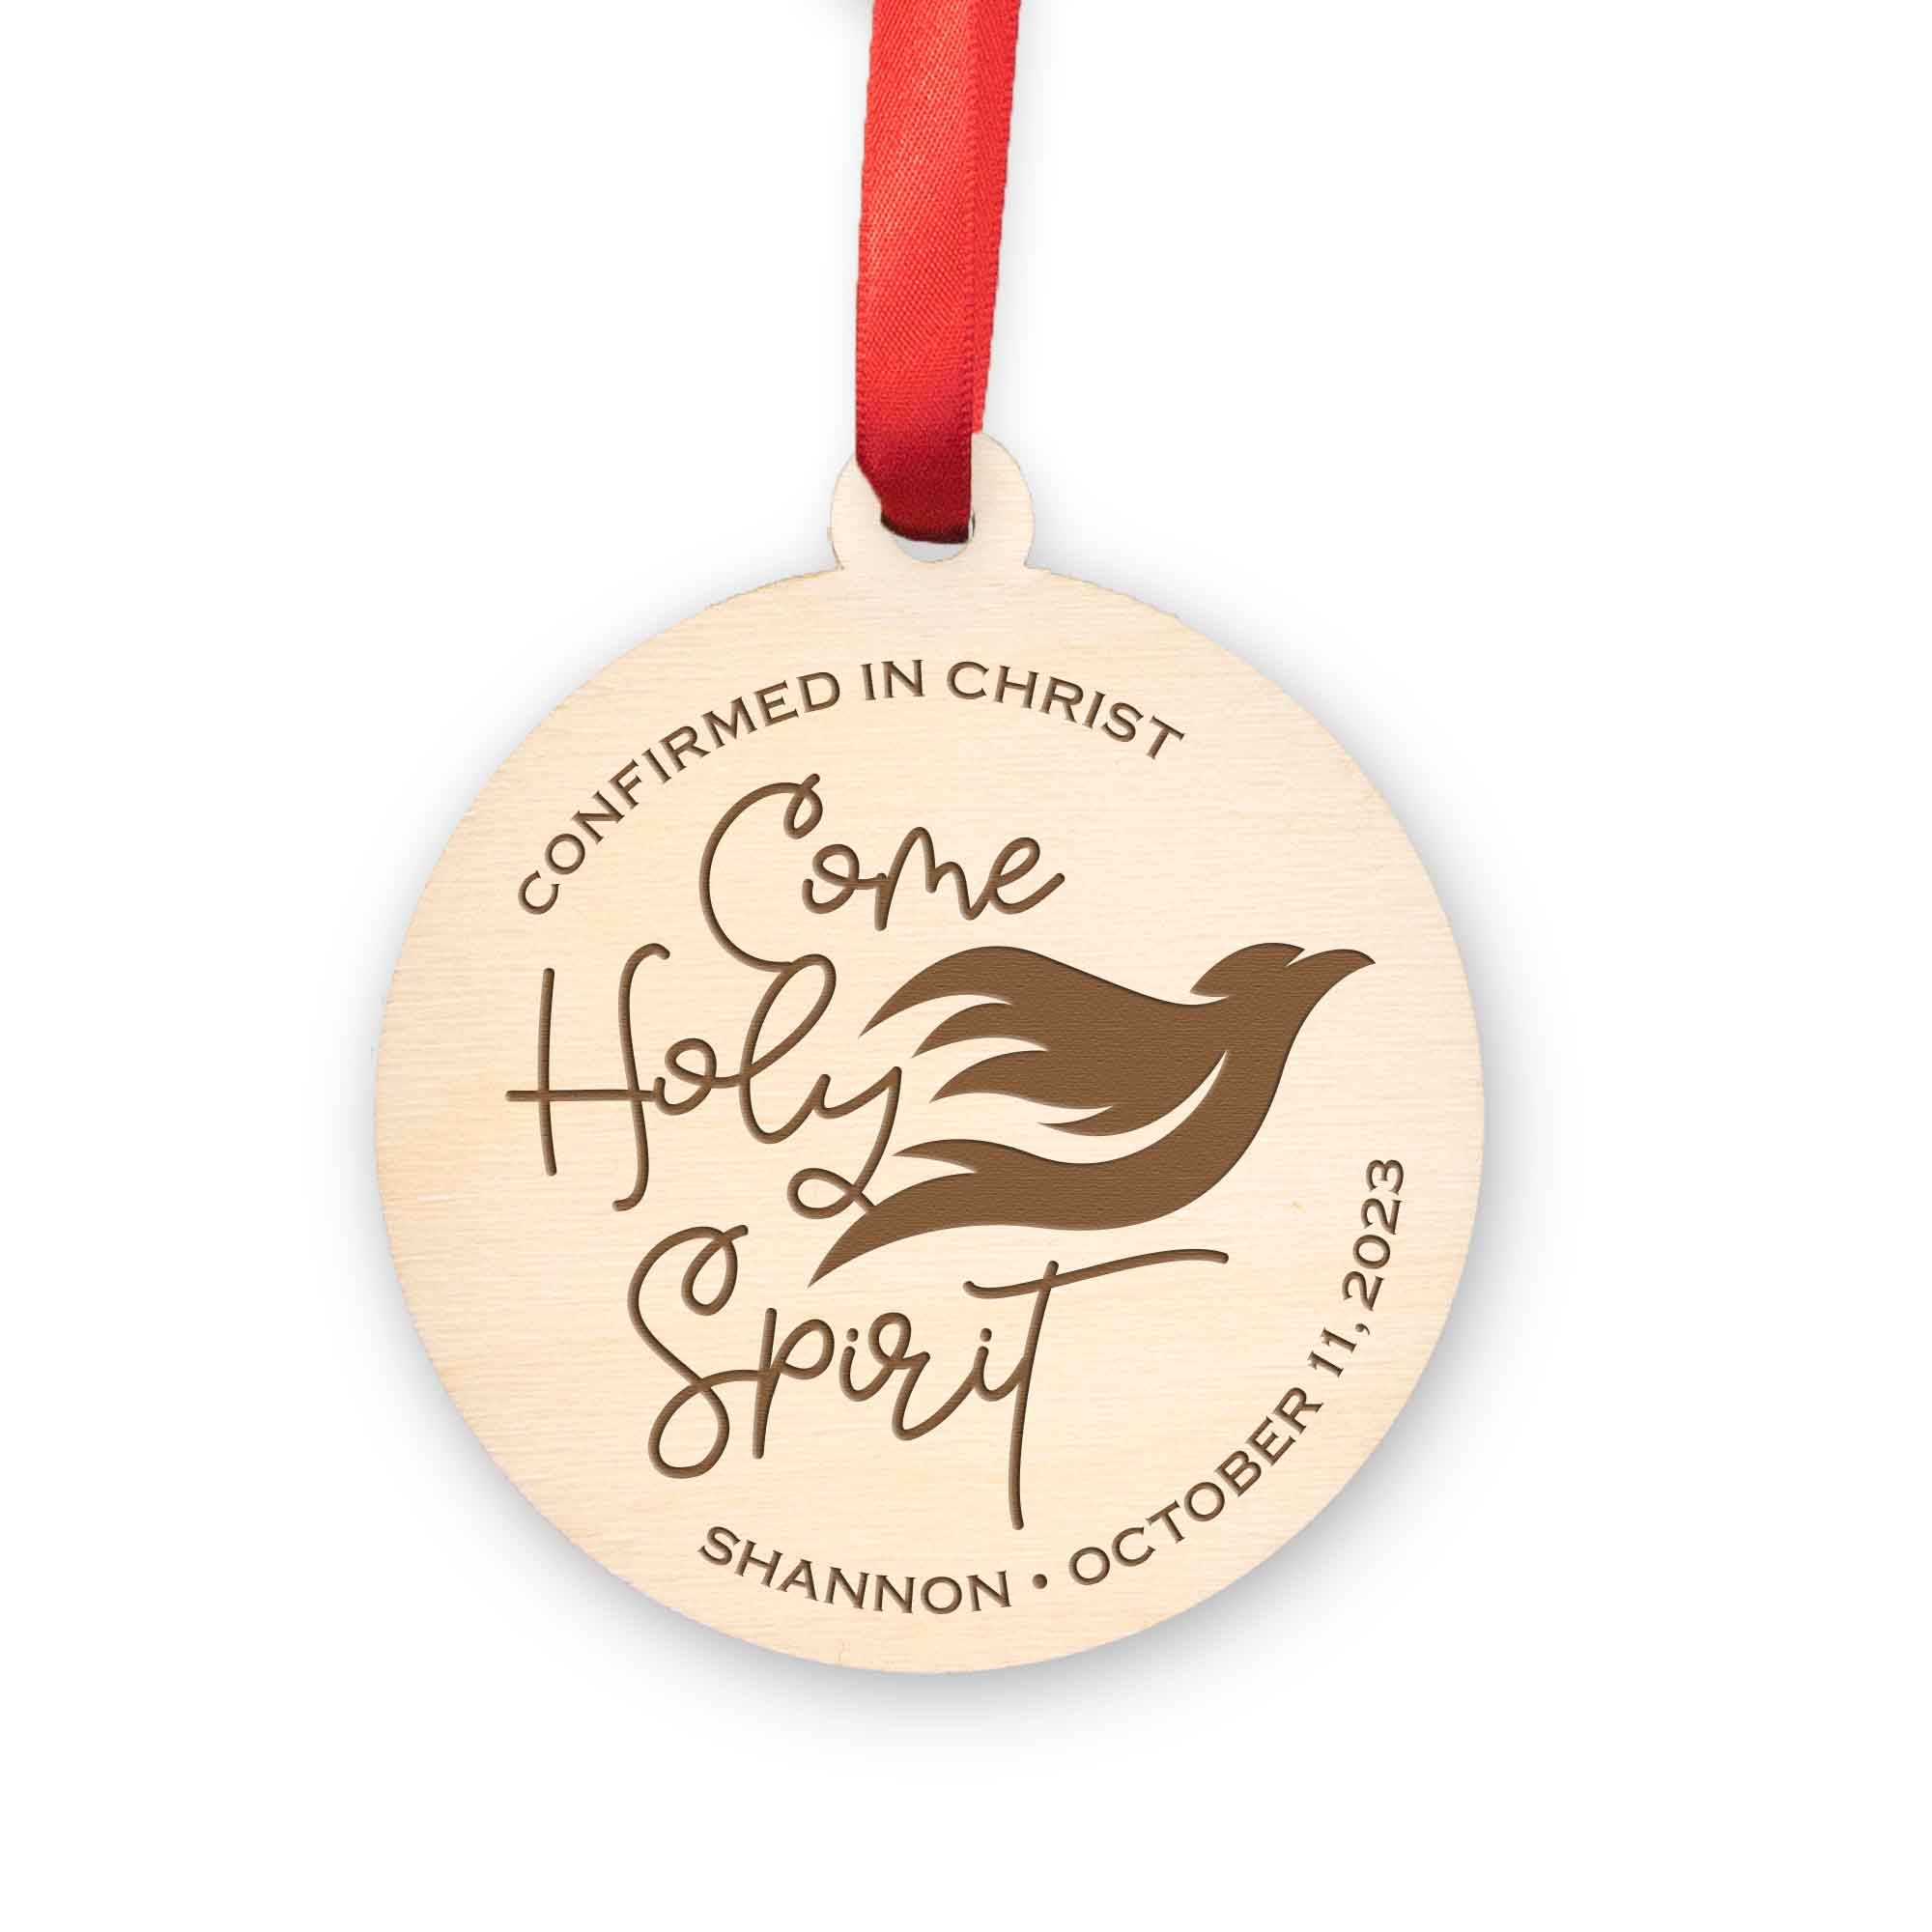 Come Holy Spirit Confirmation Wood Christmas Ornament